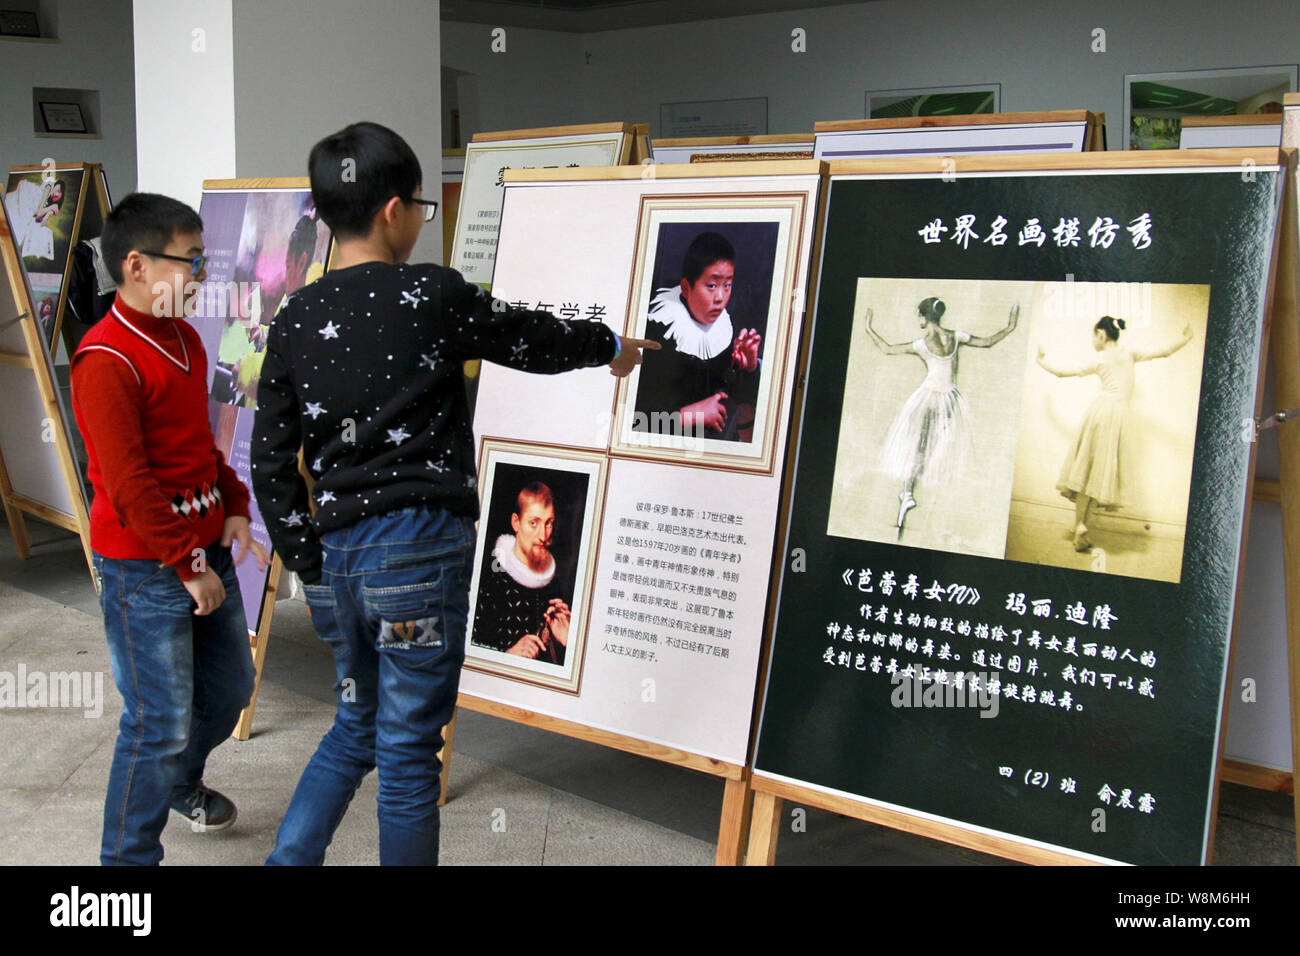 Chinese pupils look at placards showing creations by students replcating world's famous paintings during an art festival at Hangzhou Shengfulu Primary Stock Photo